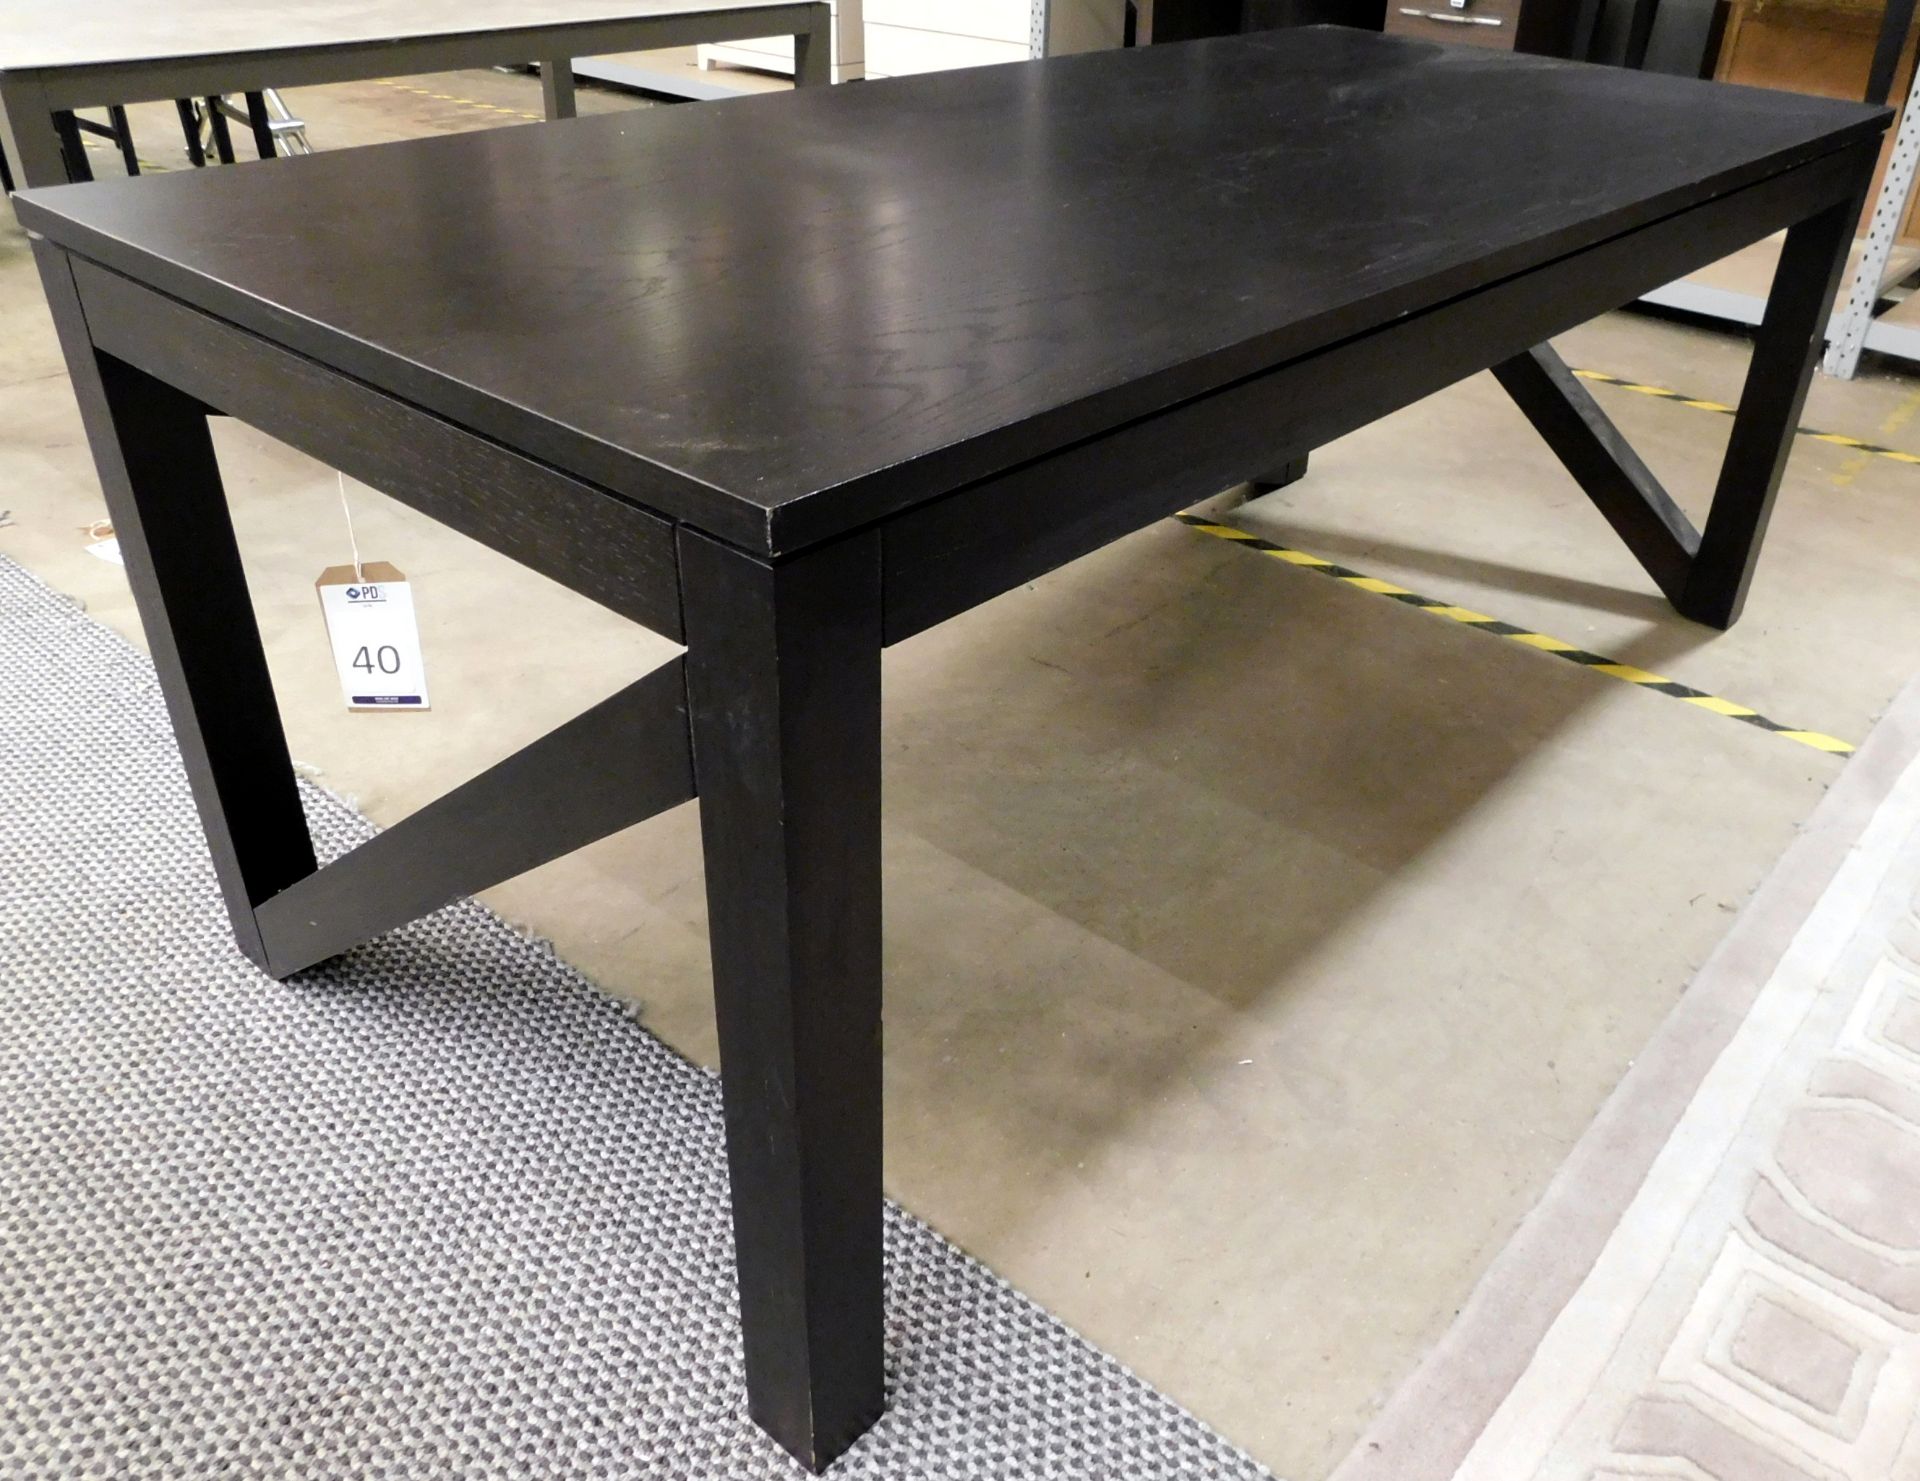 Michael Northcroft Bespoke Desk Table (Scratched) (Approximate Retail £2,000) (6ft 8in Long)